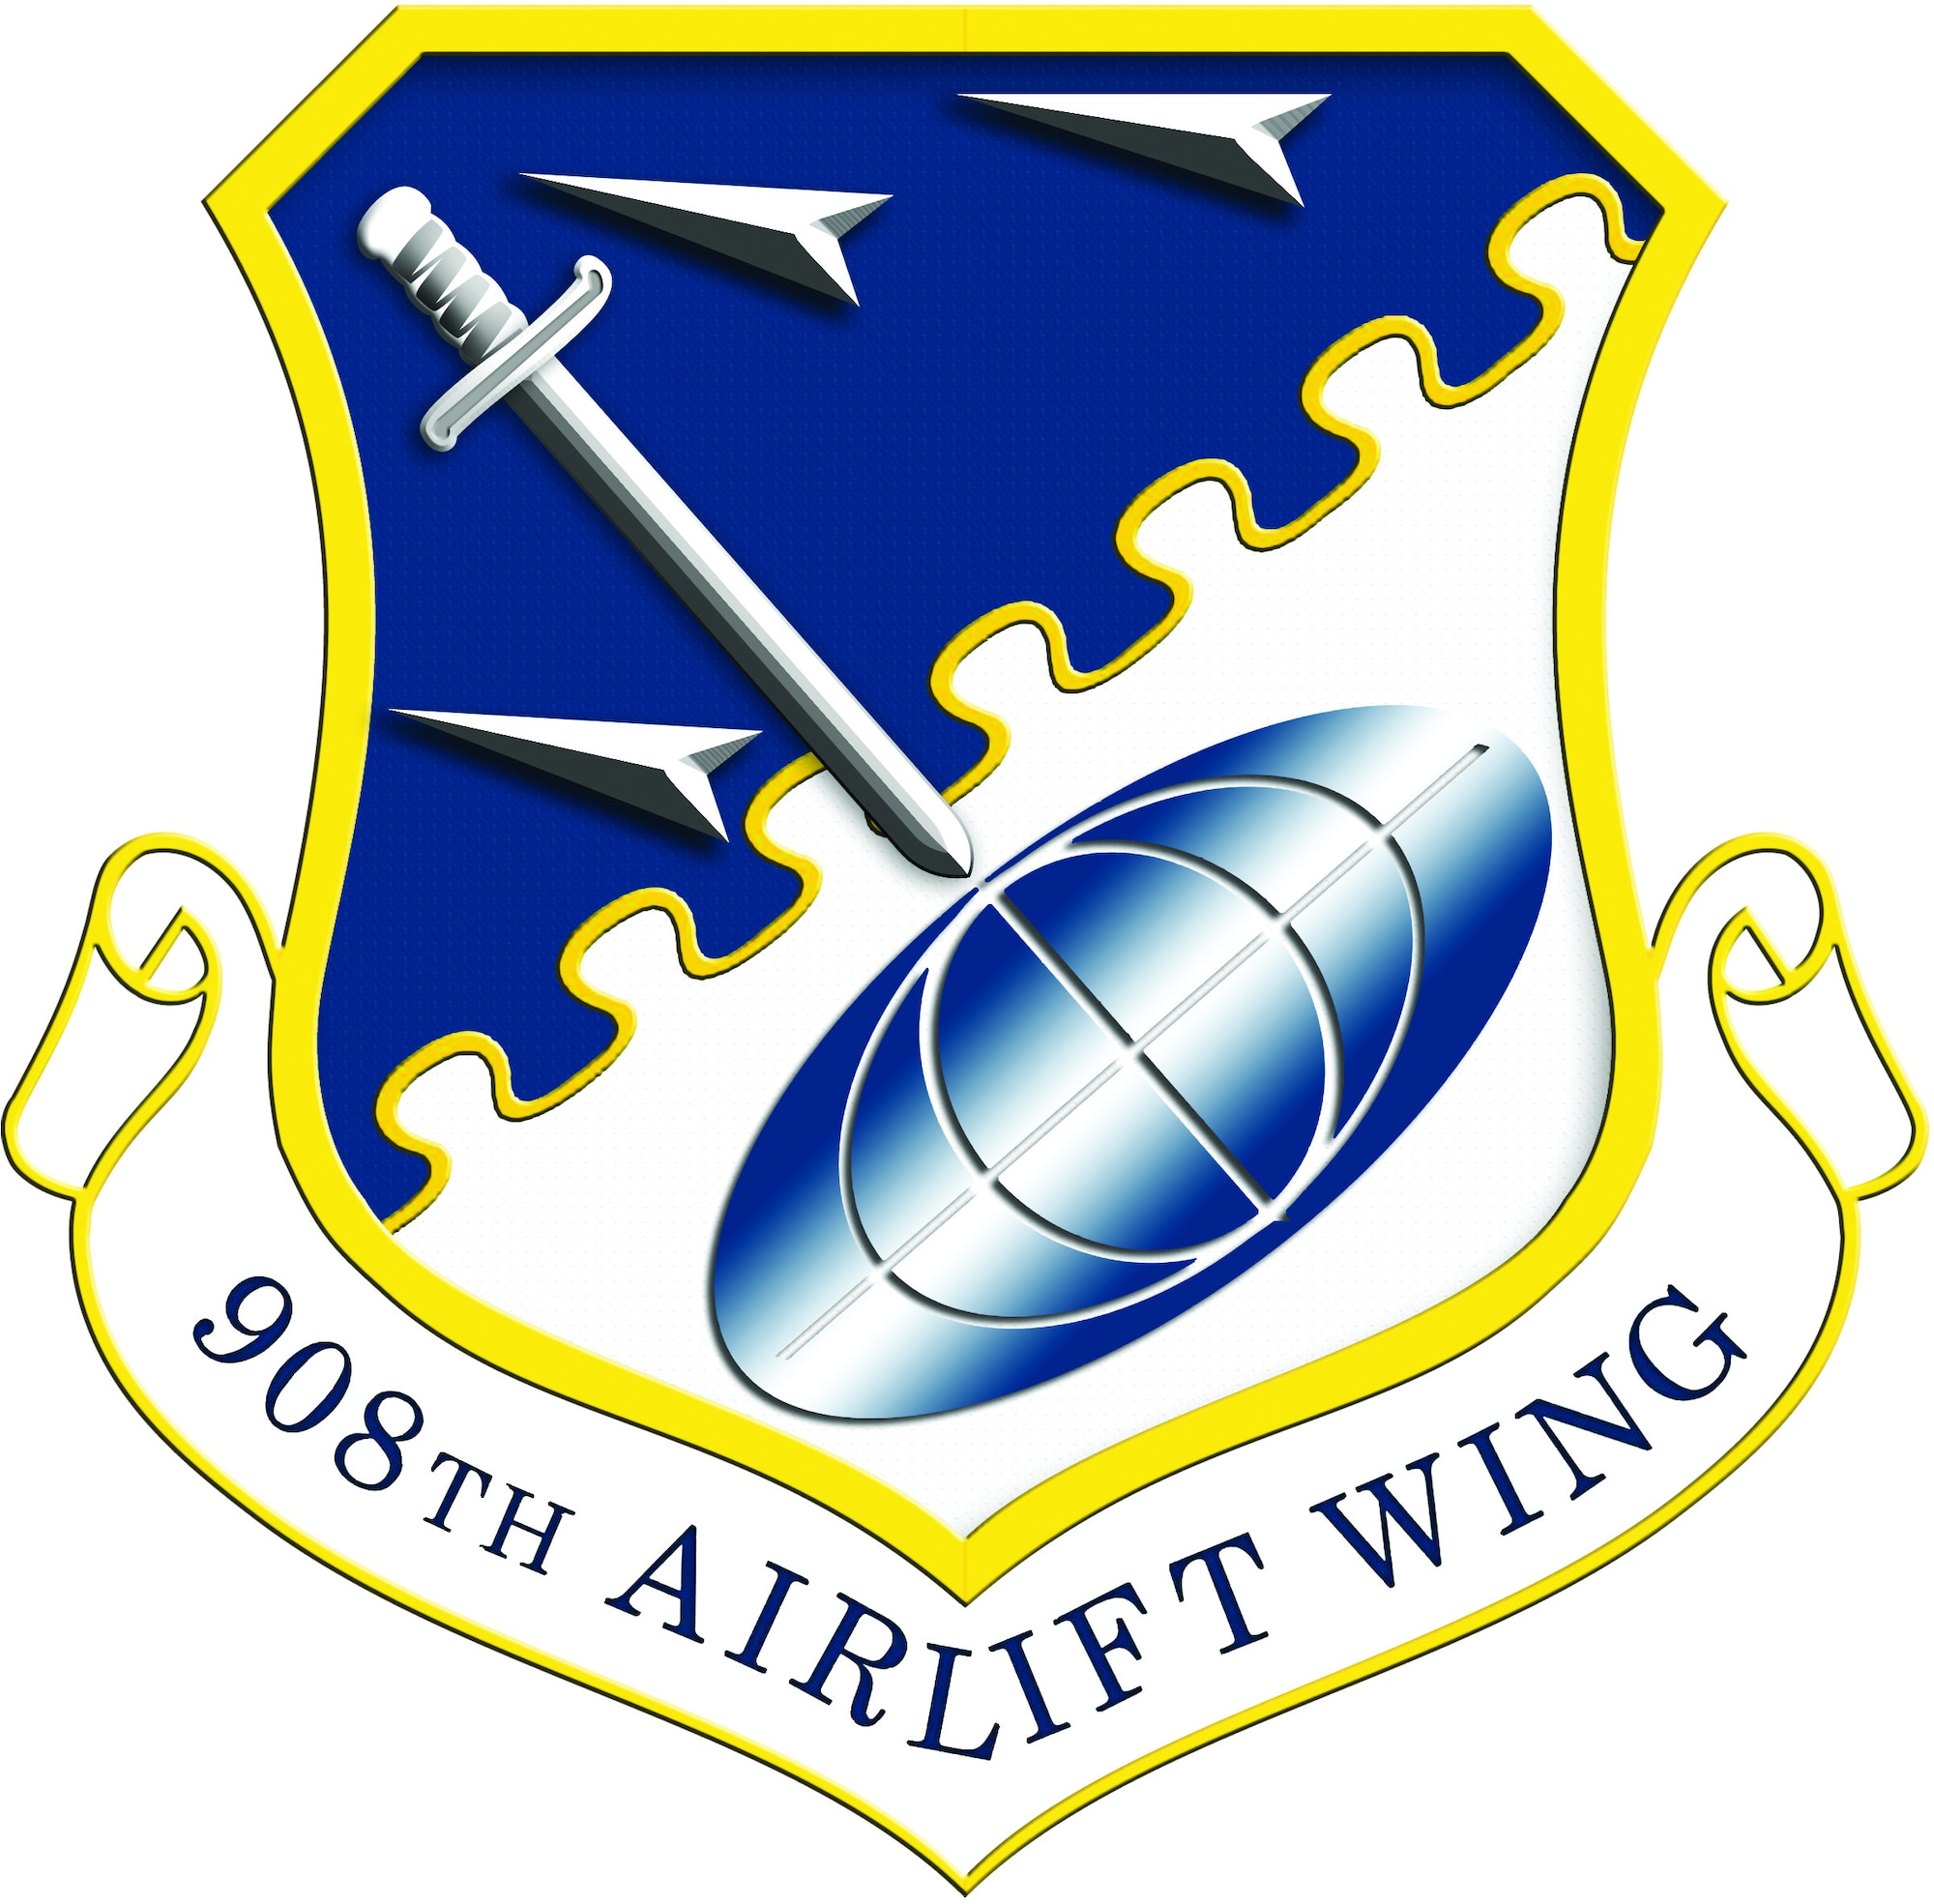 We are The 908th: The 908th Airlift Wing > 908th Airlift Wing